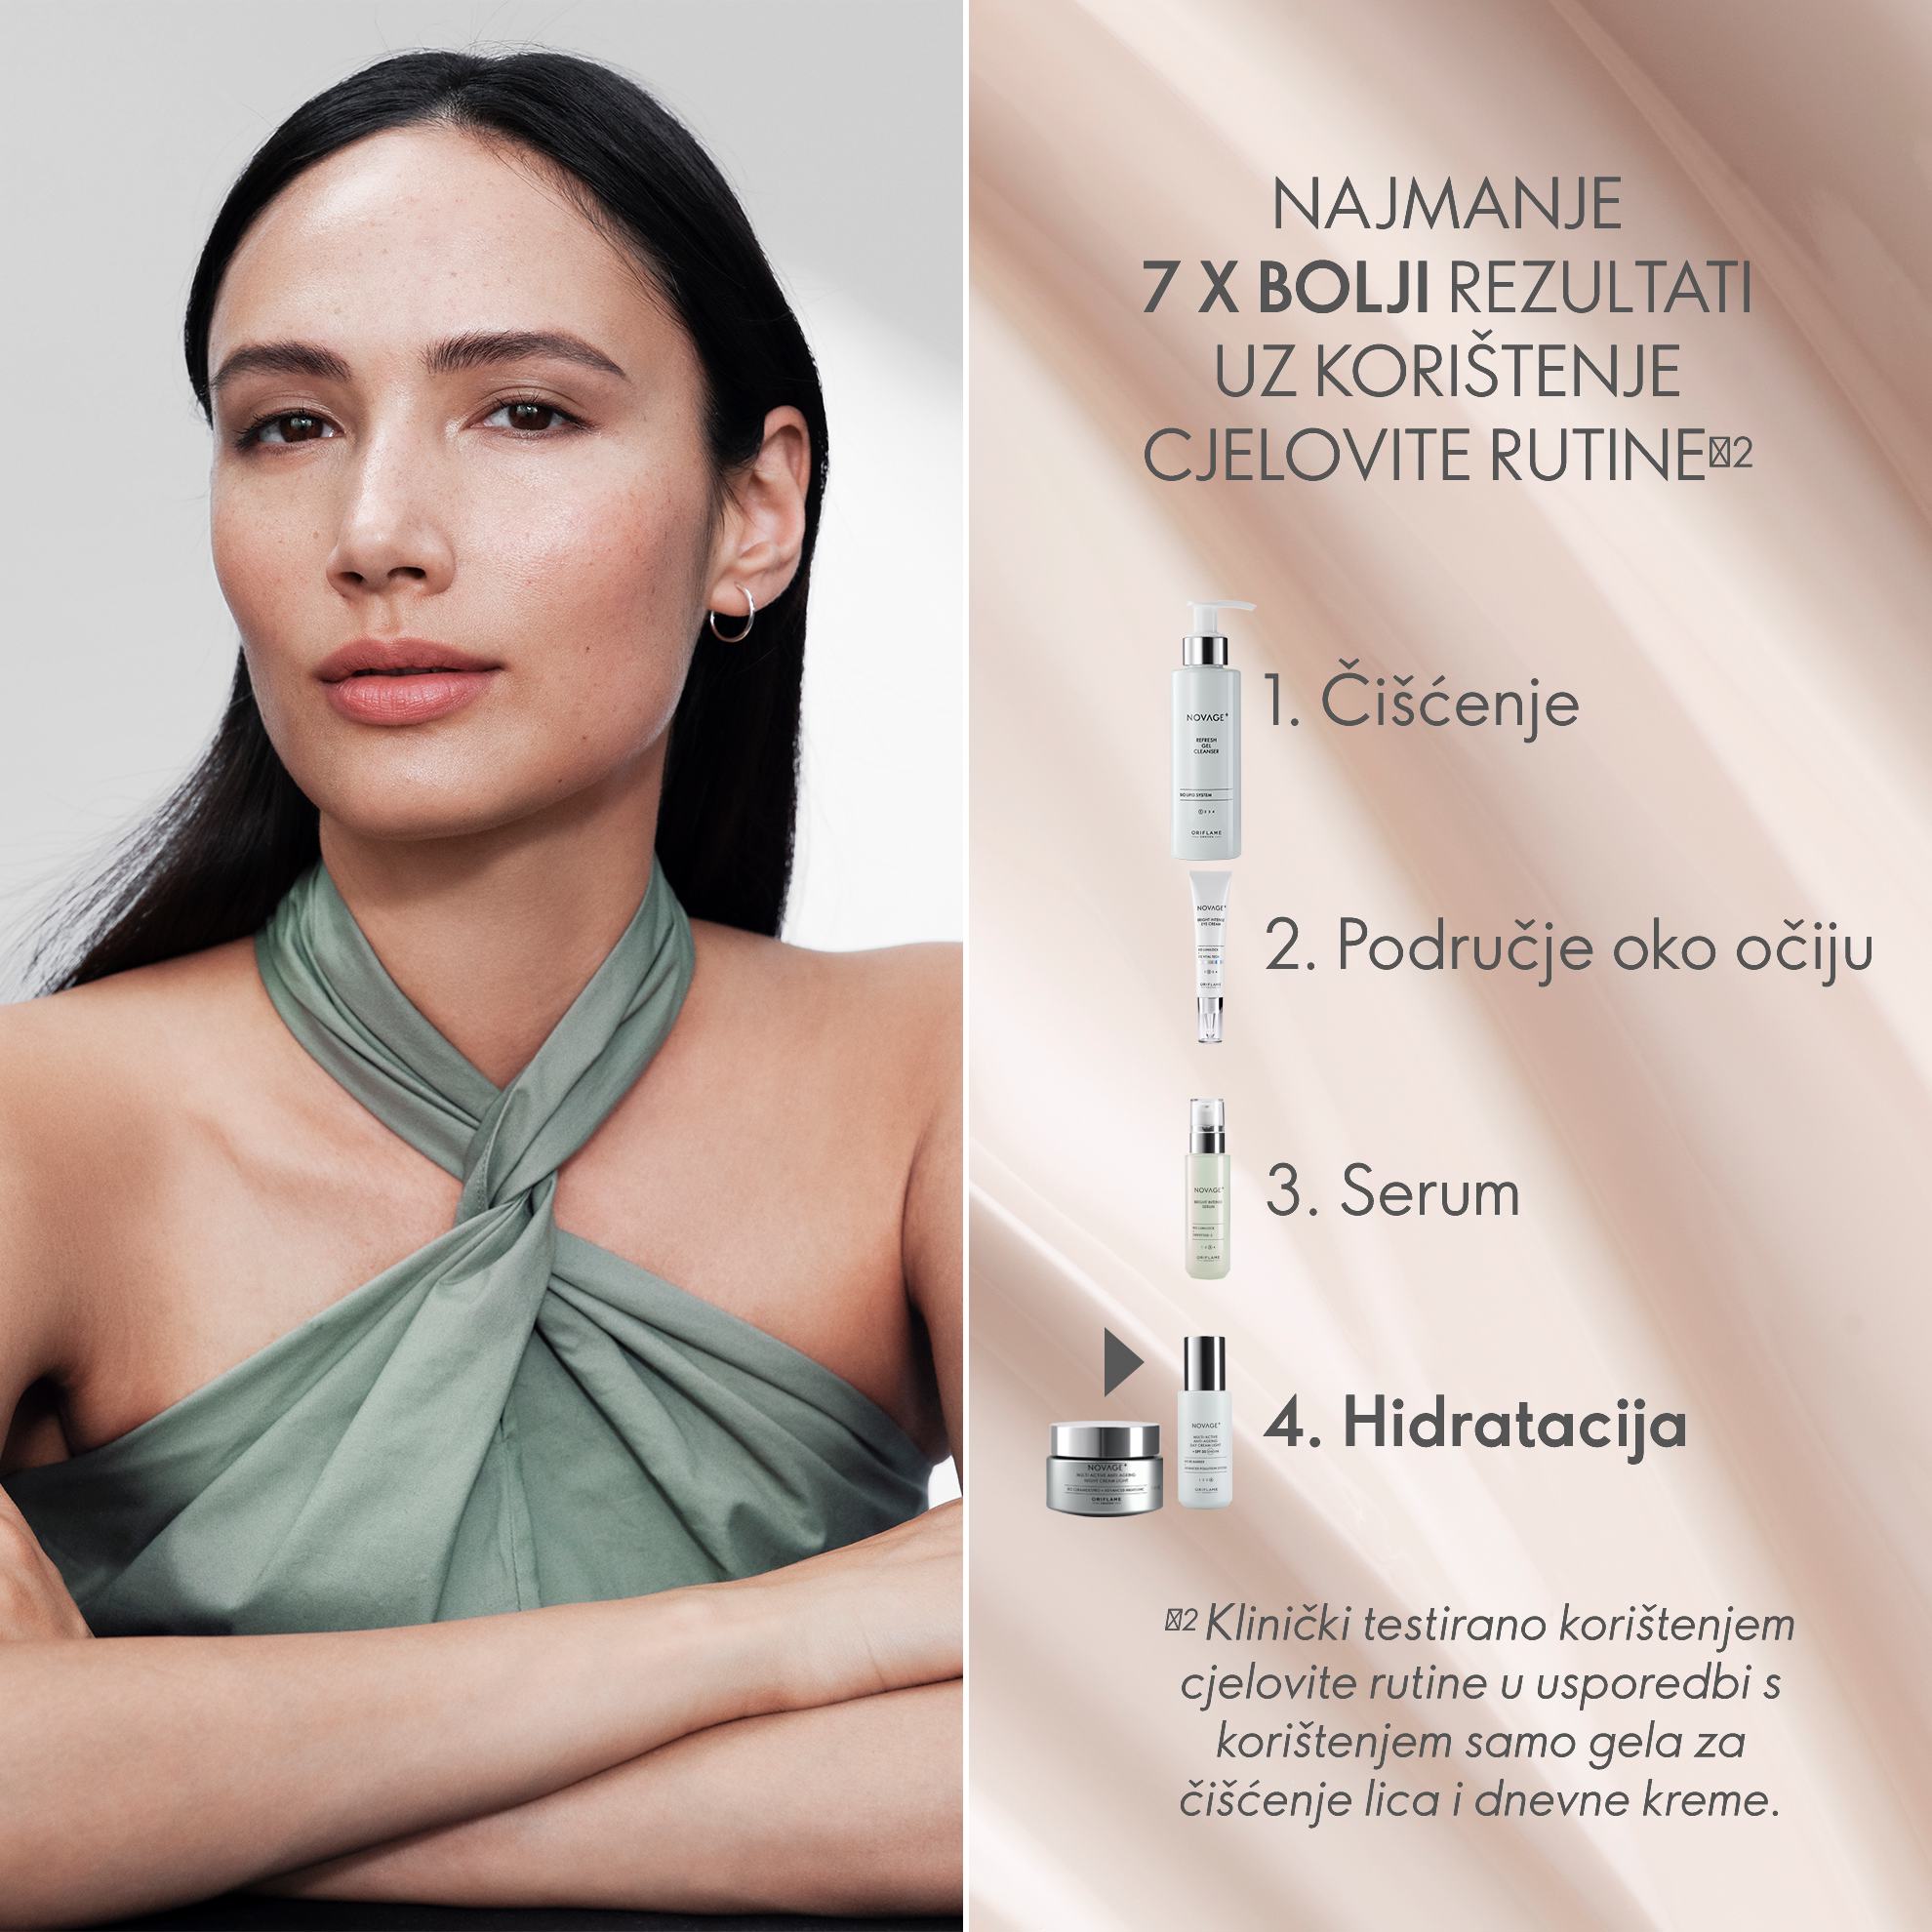 https://media-cdn.oriflame.com/productImage?externalMediaId=product-management-media%2fProducts%2f41057%2fHR%2f41057_5.png&id=17556500&version=1